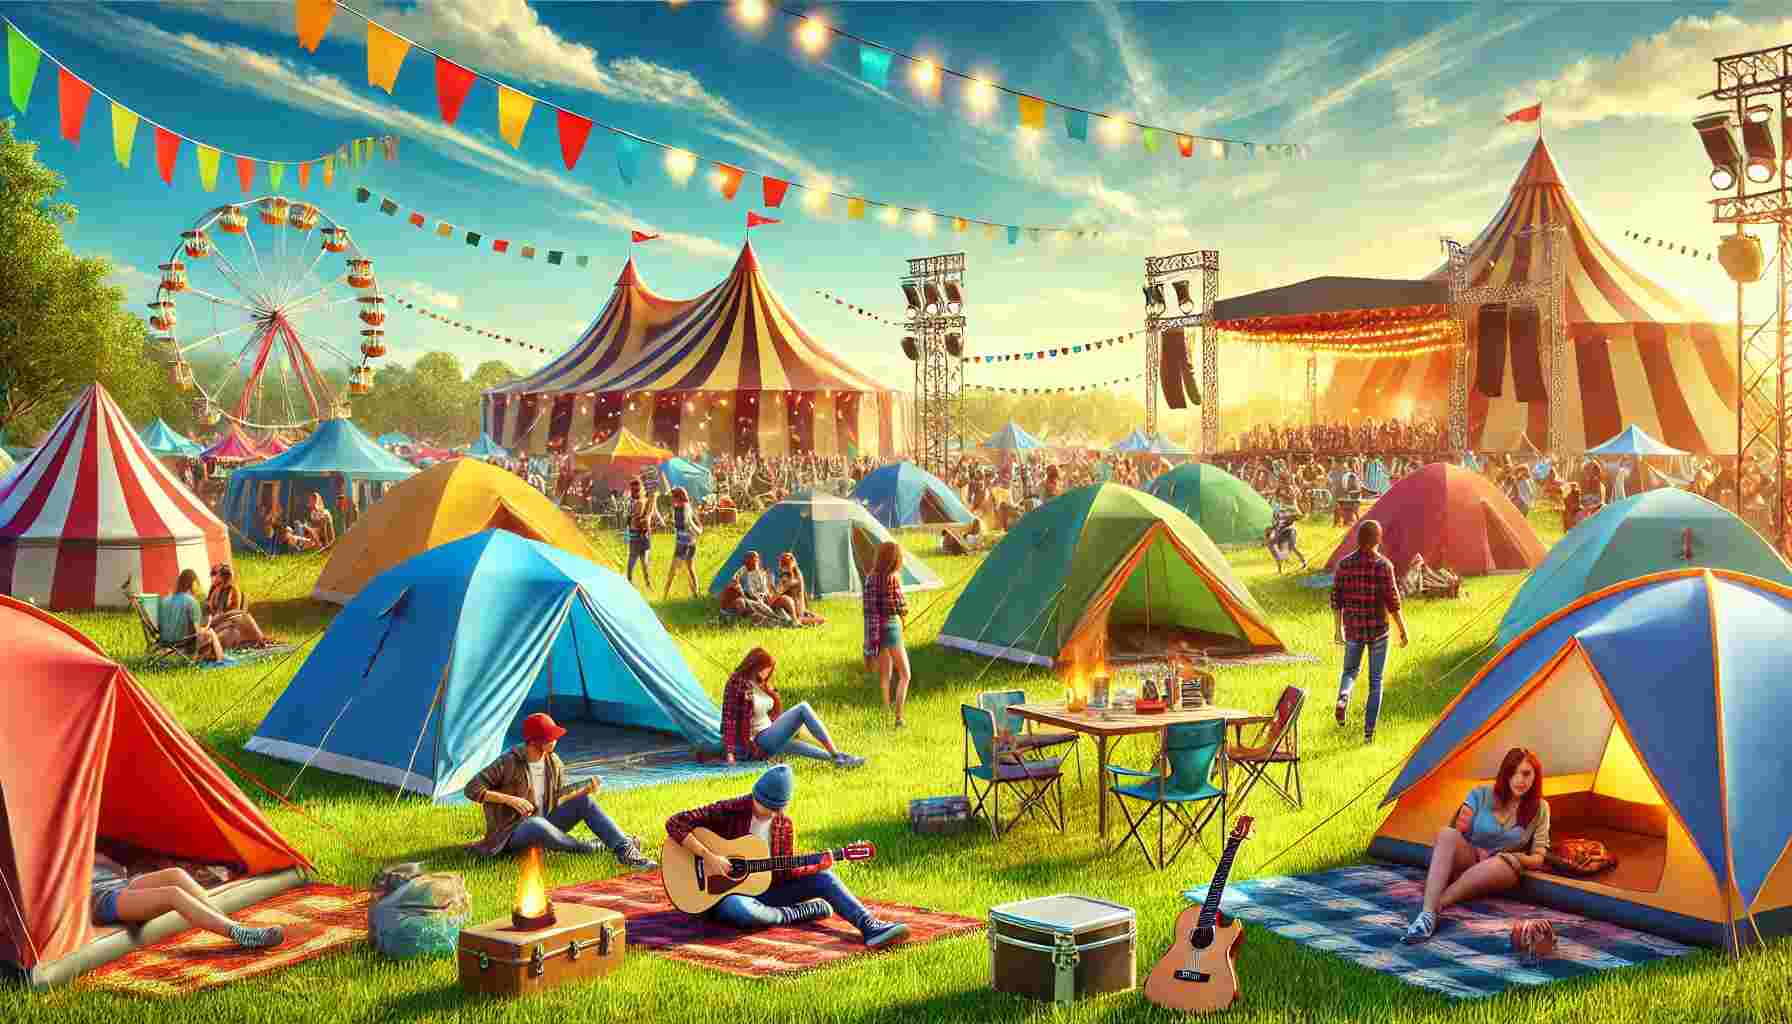 A vibrant festival camping scene with multiple colorful tents set up in a grassy field under a bright blue sky. People are enjoying their time around the tents, playing guitars, laughing, and relaxing. The background shows a lively festival environment with flags, lights, and a stage in the distance.